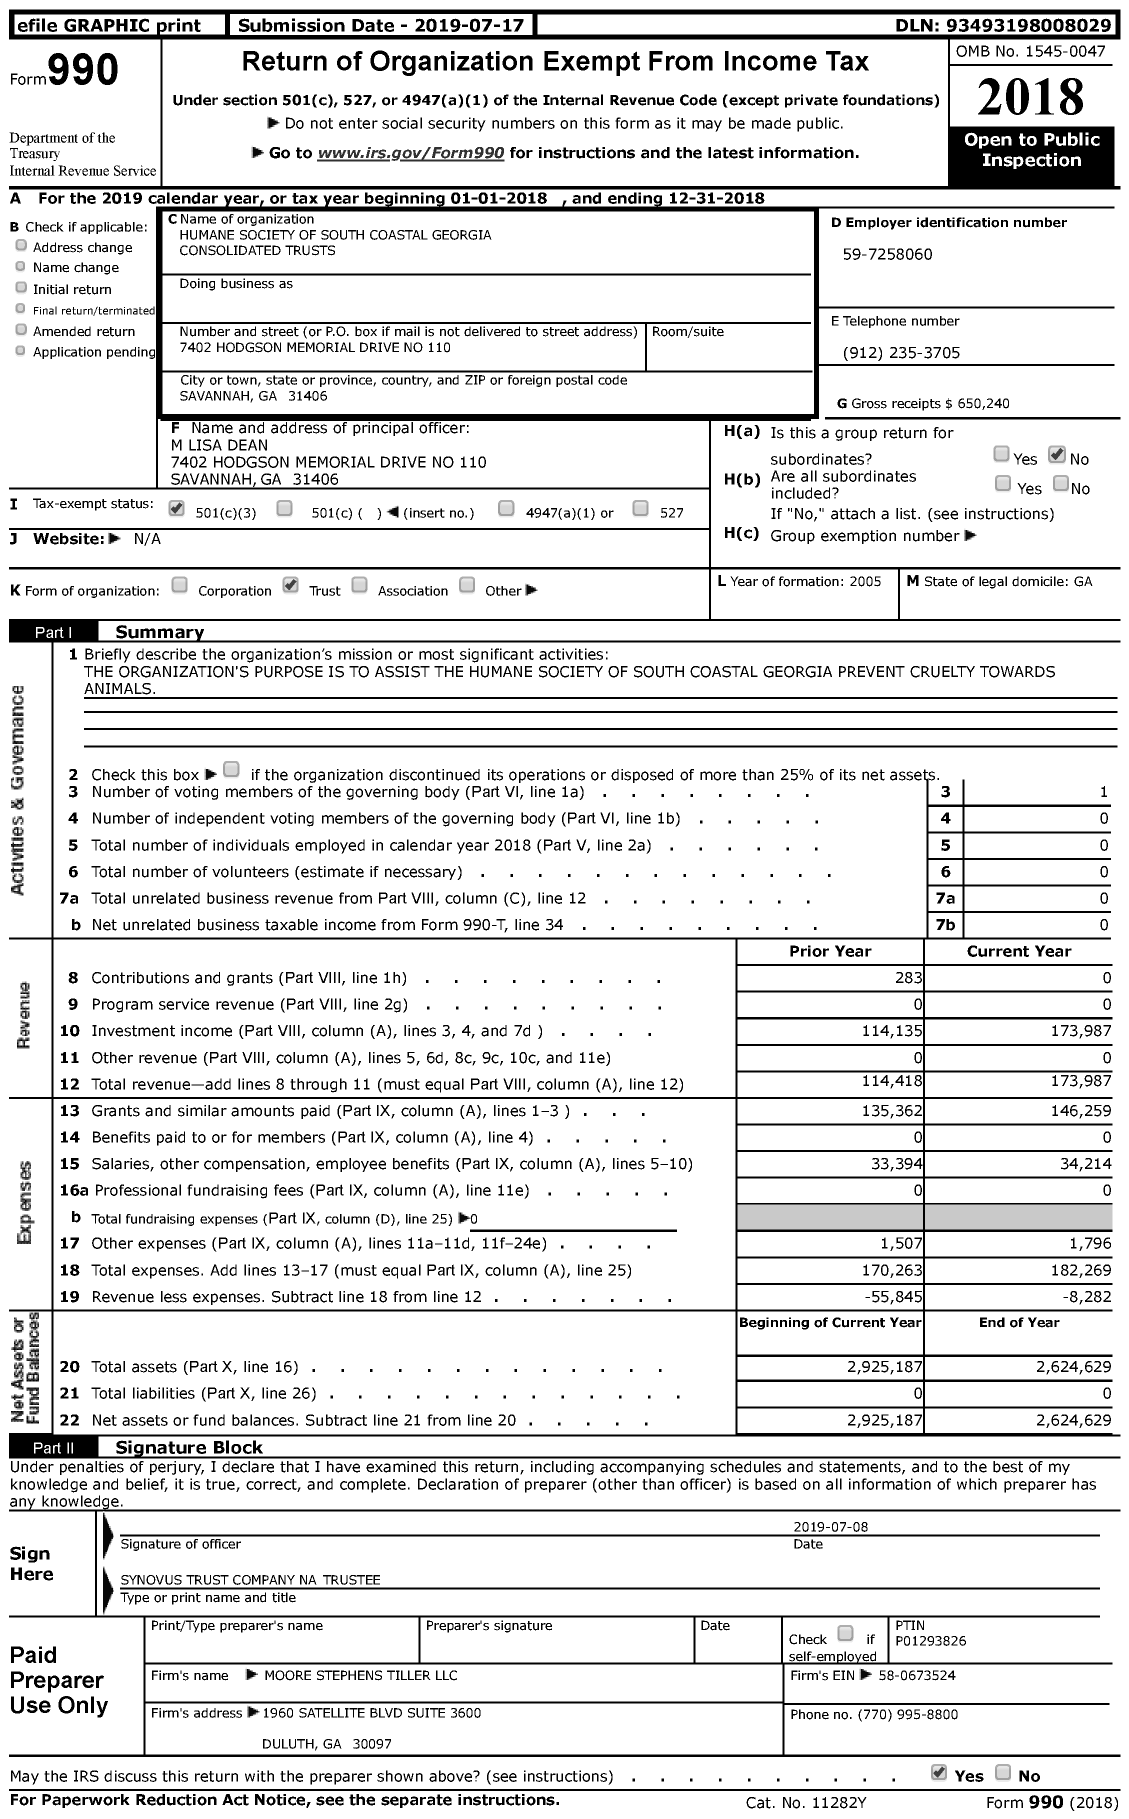 Image of first page of 2018 Form 990 for Humane Society of South Coastal Georgia Consolidated Trusts